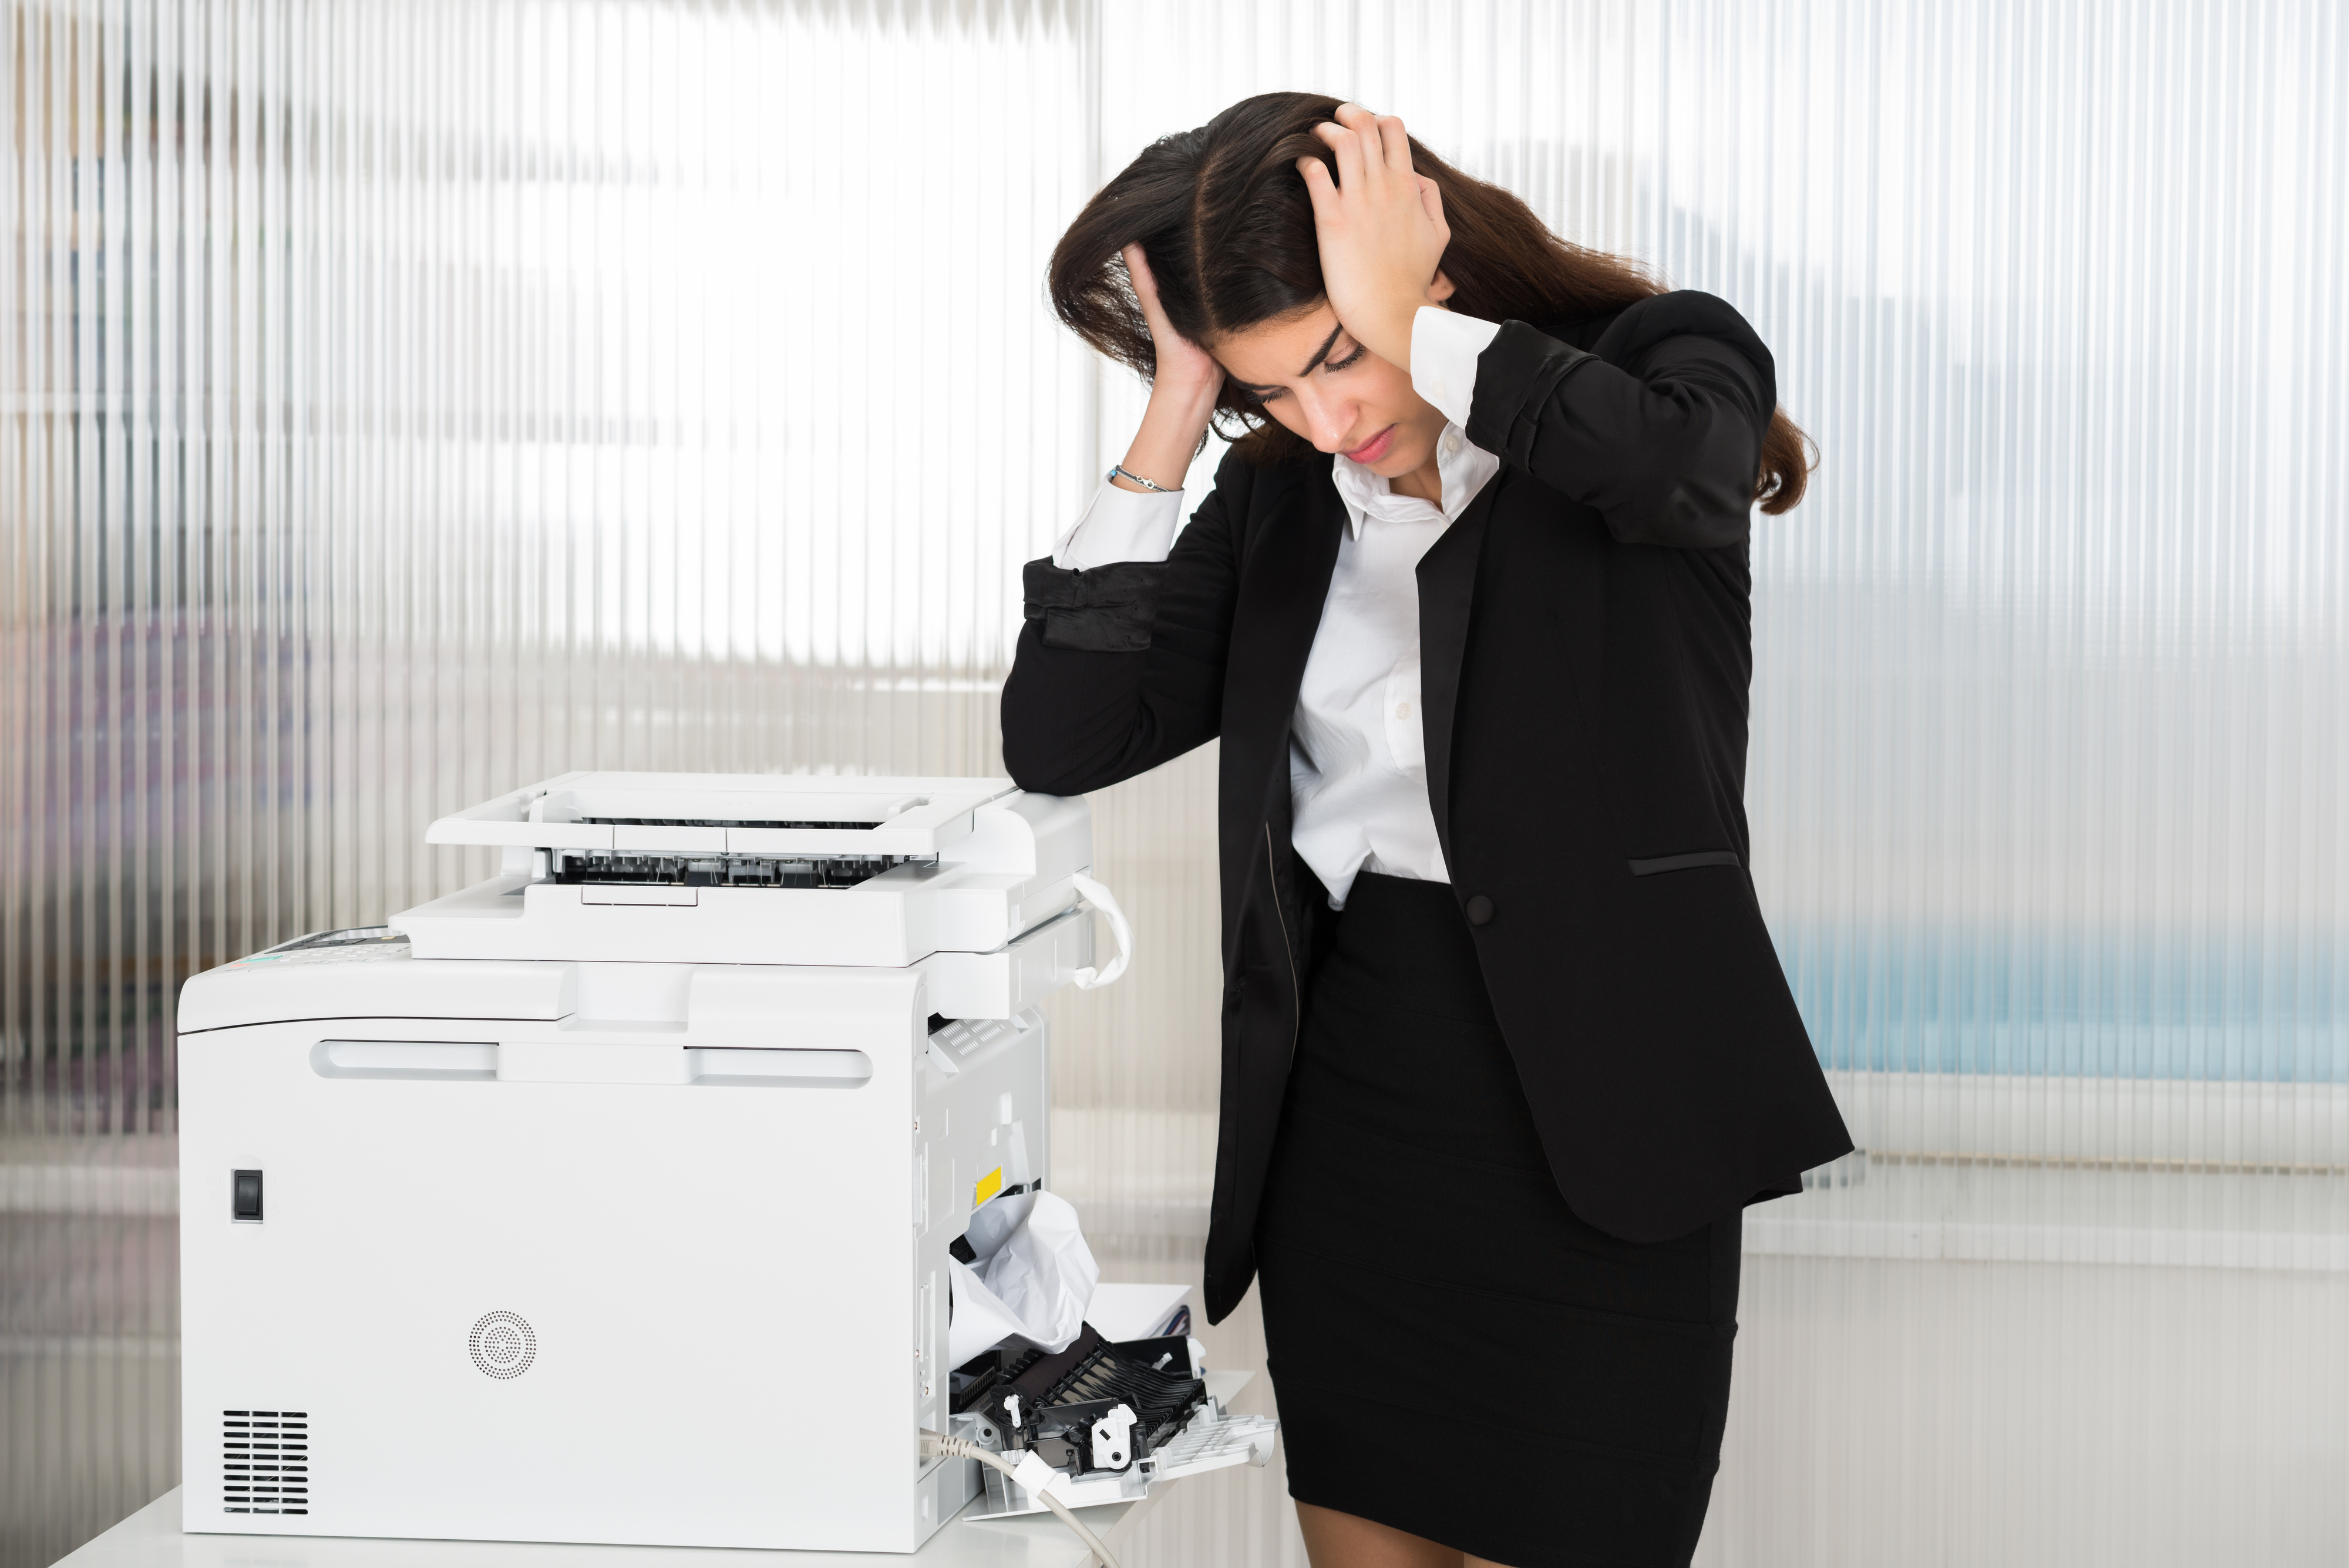 Woman appears frustrated with a jammed printer in an office setting